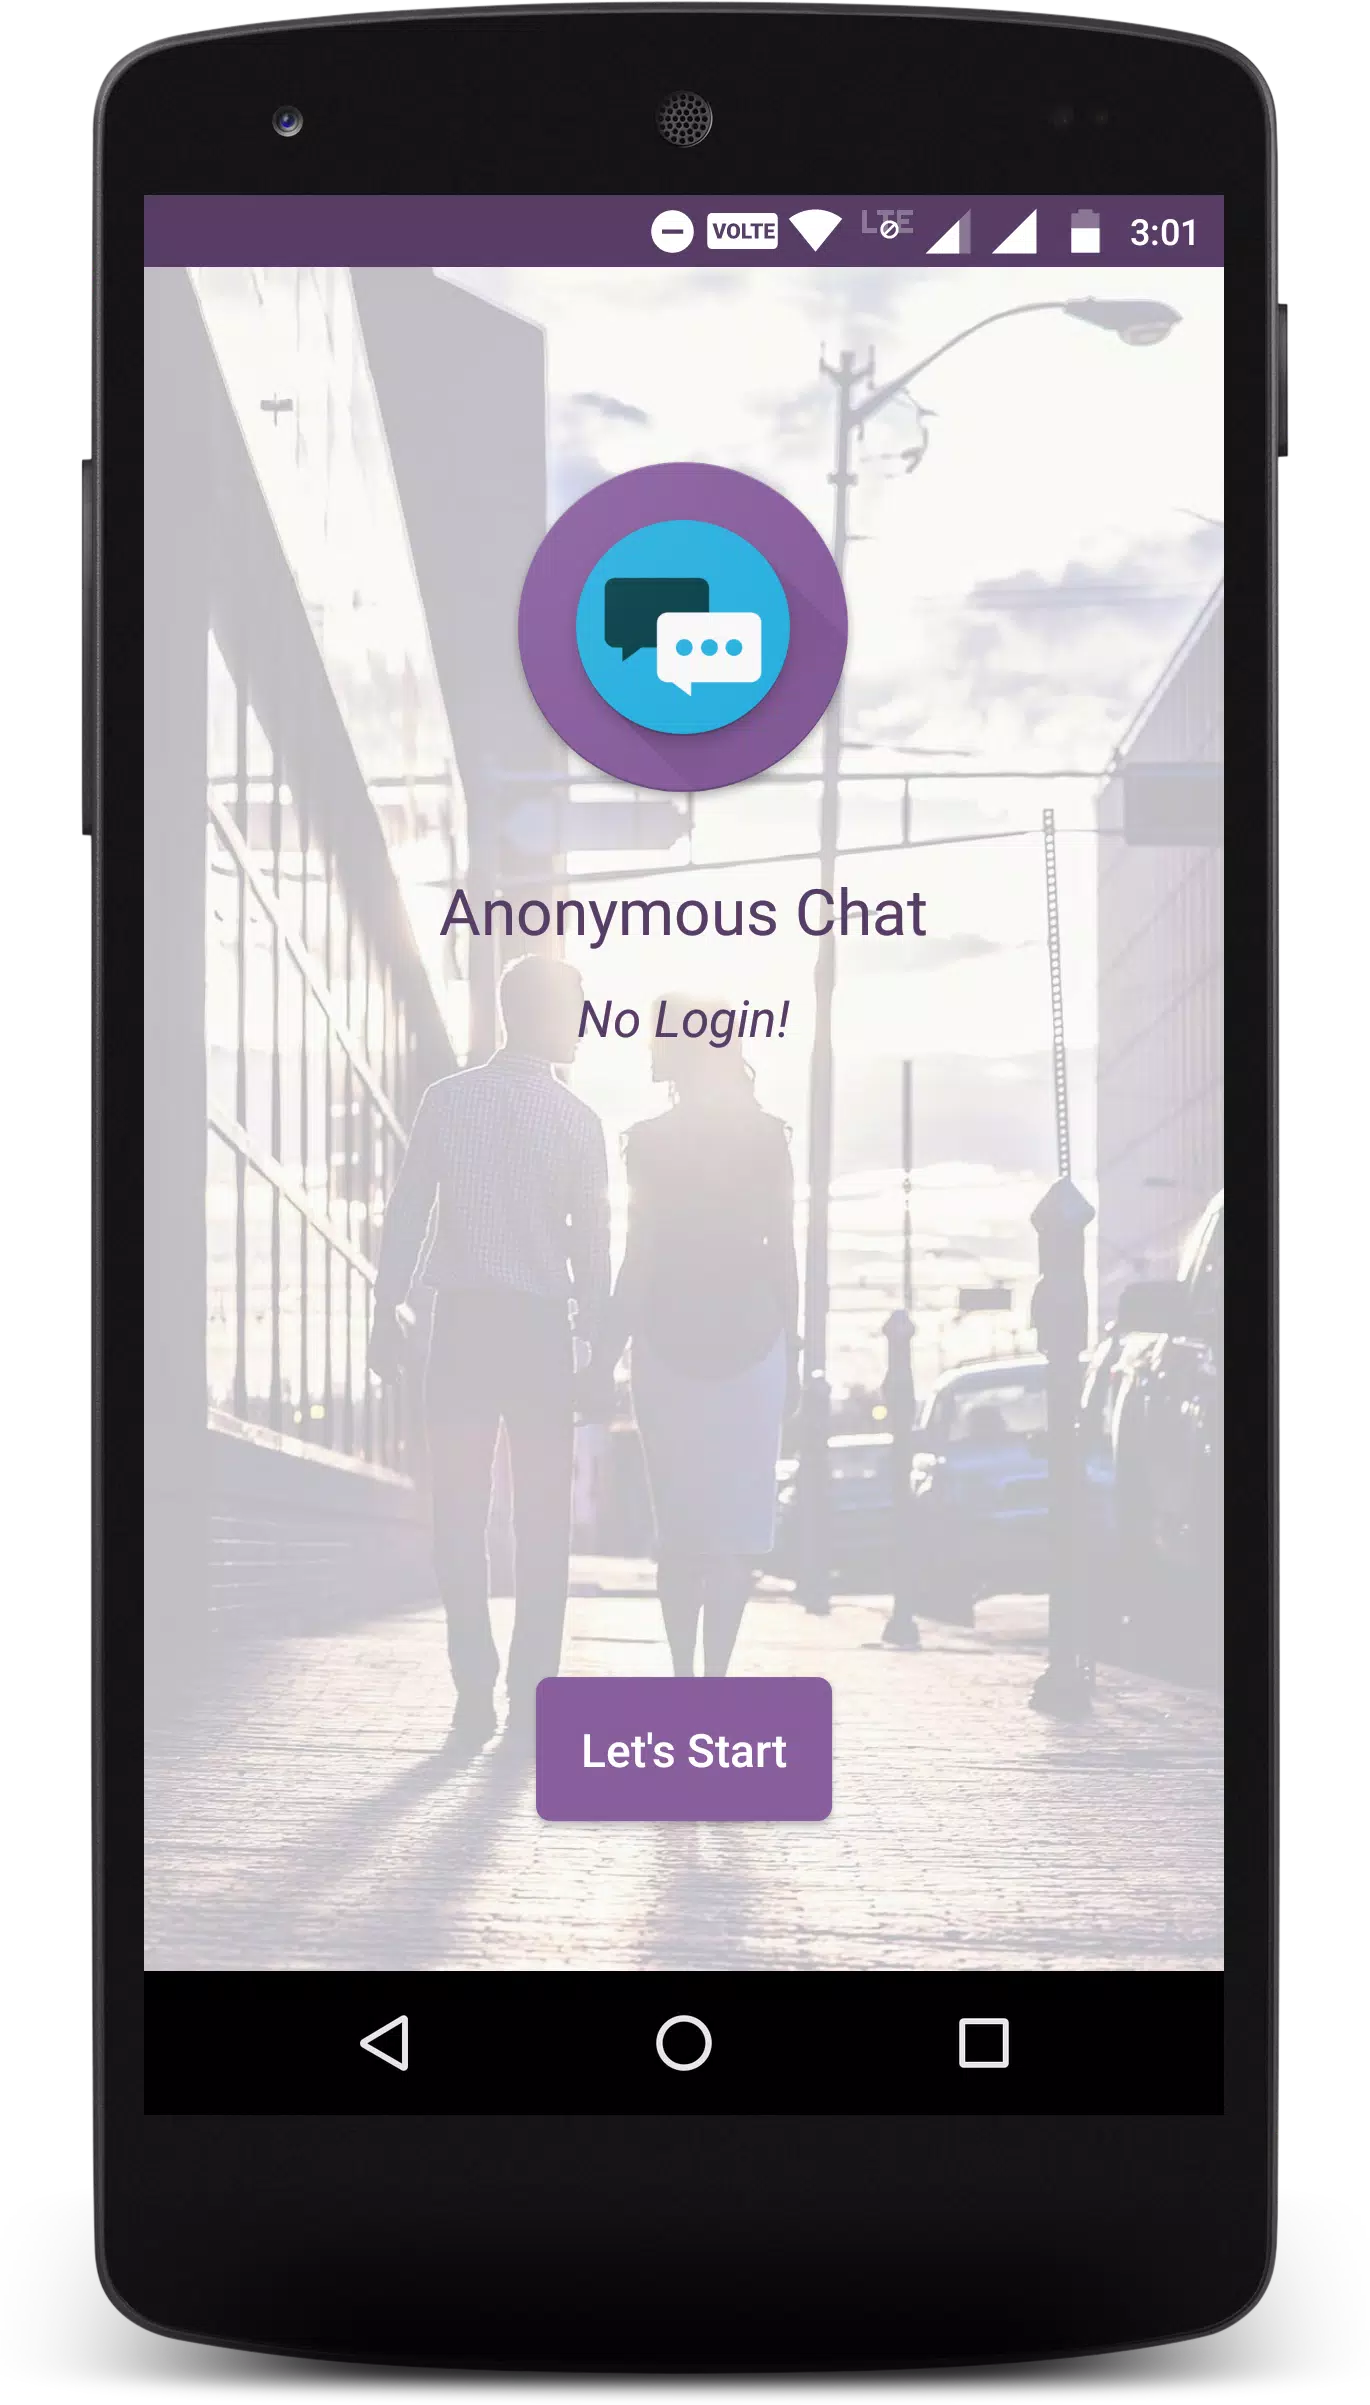 Anoynums chat